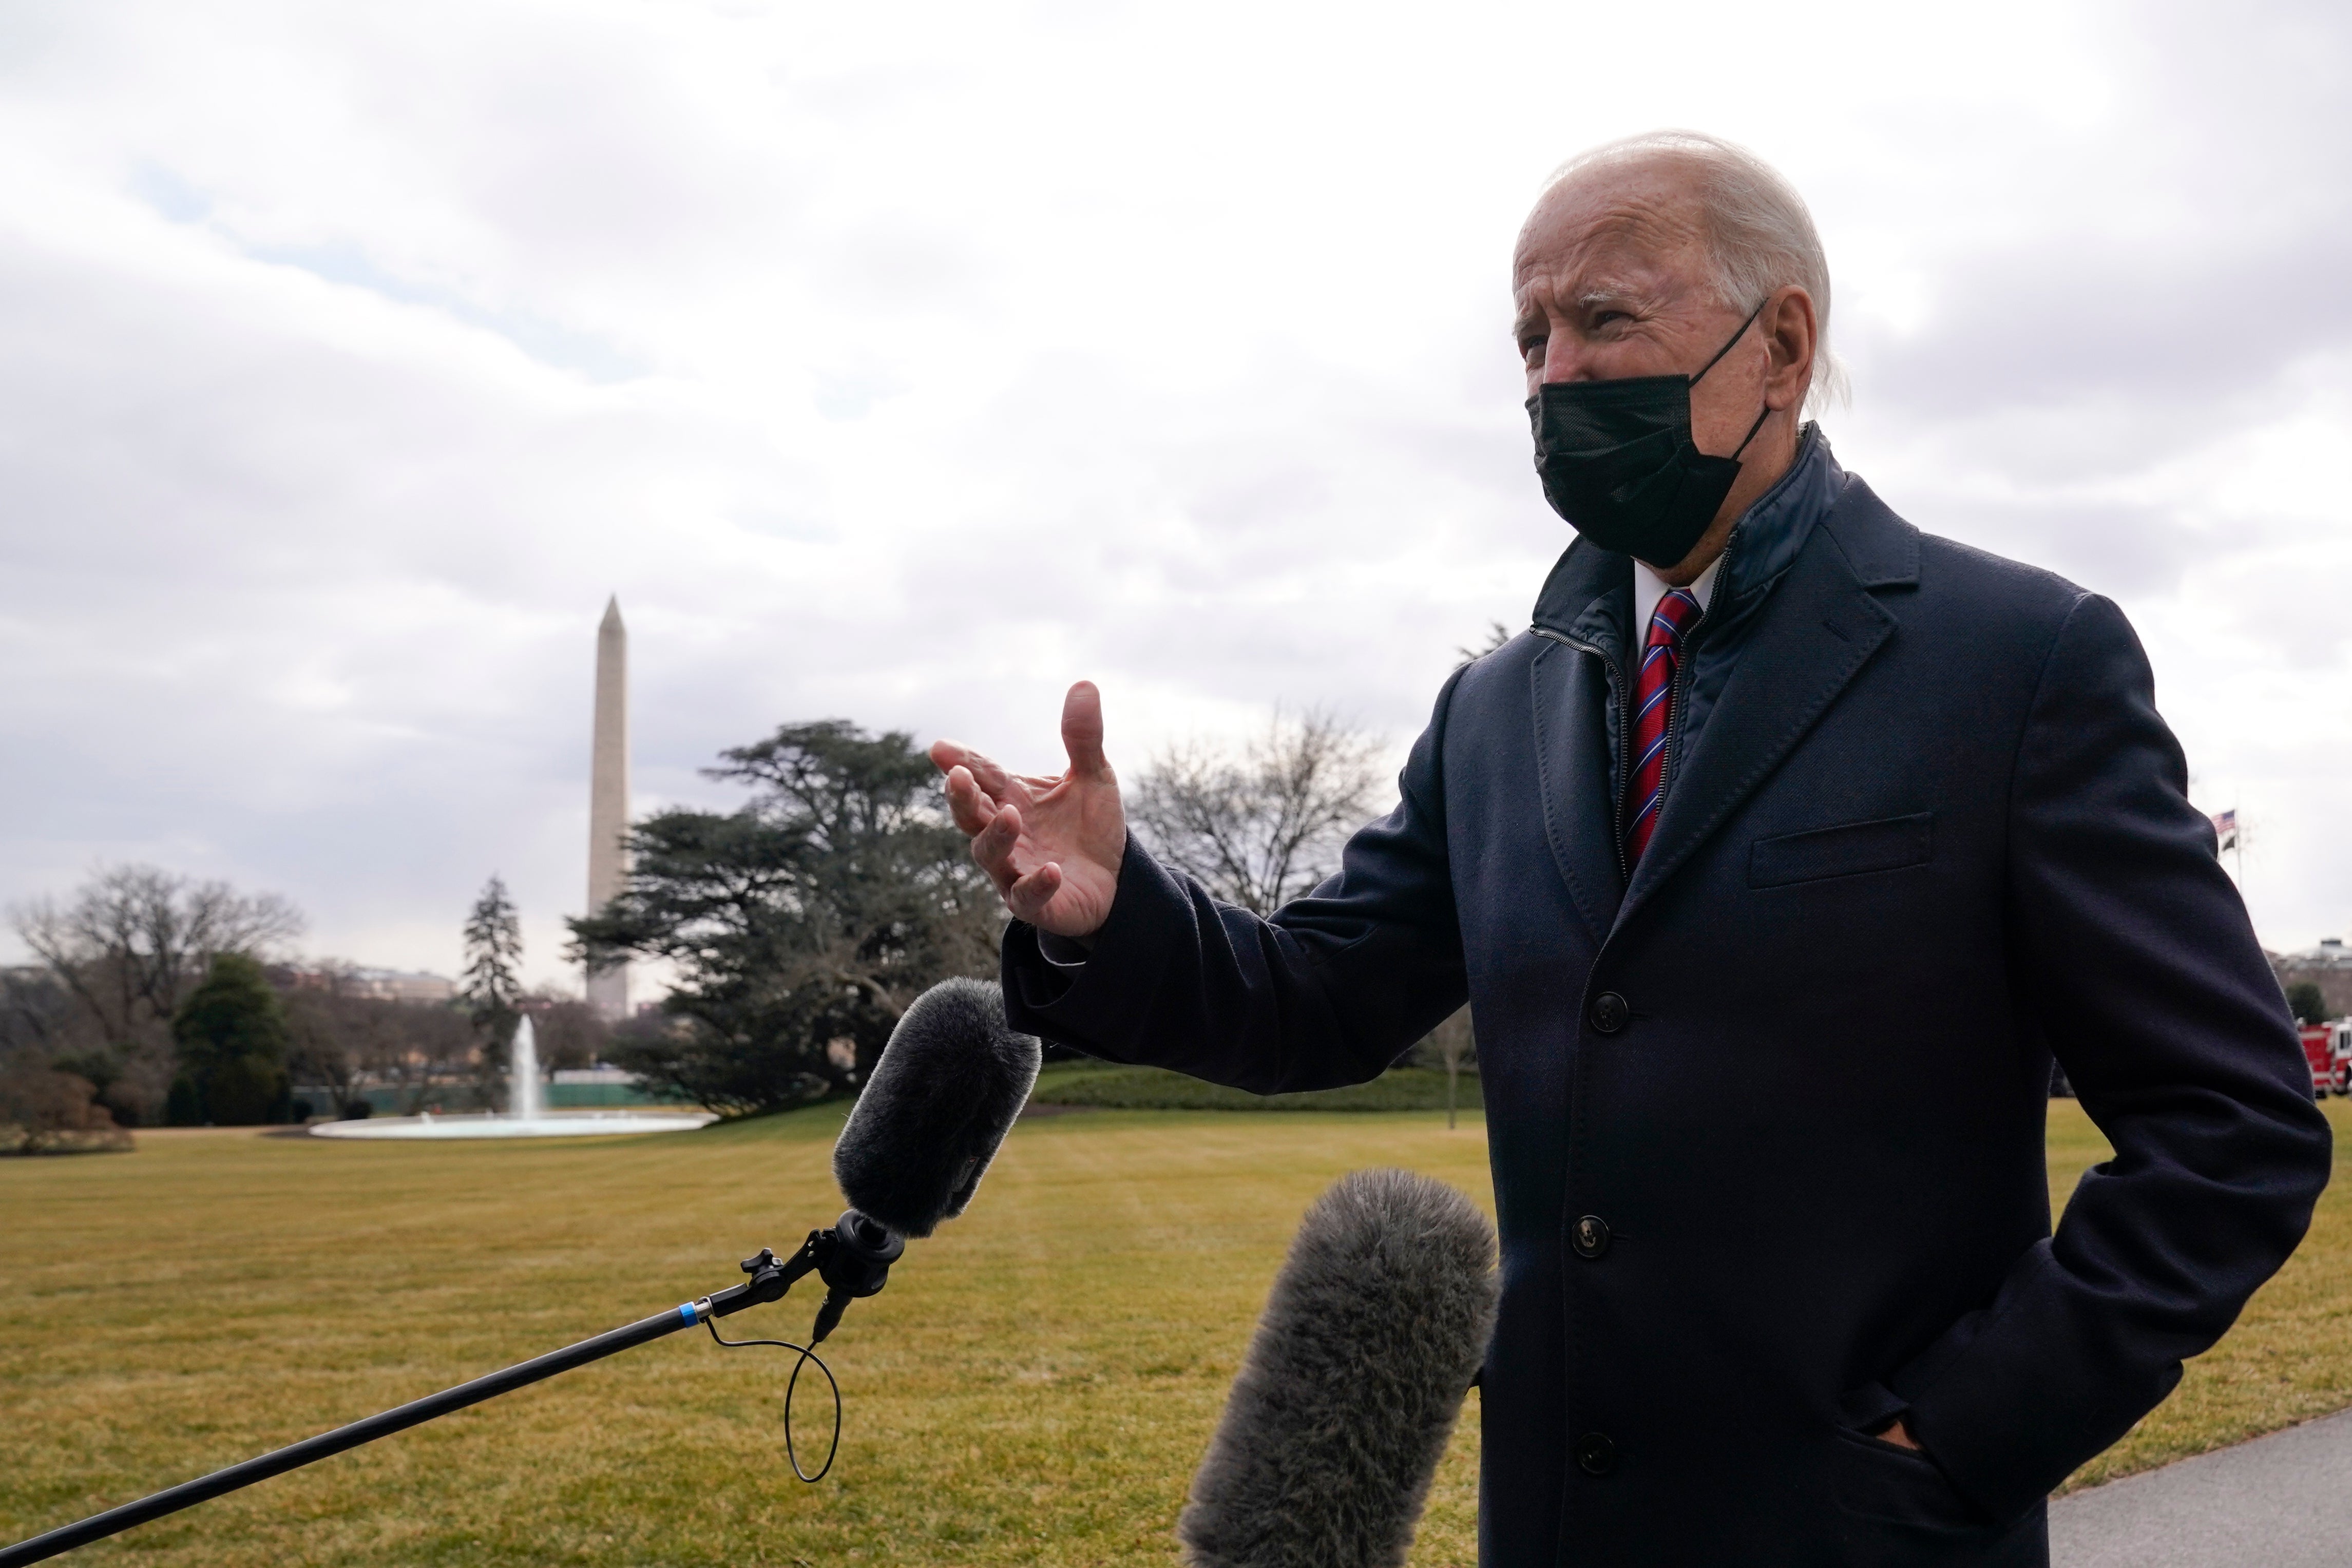 Joe Biden pictured departing the White House to fly on Marine One on a visit to Walter Reed National Military Medical Centre.